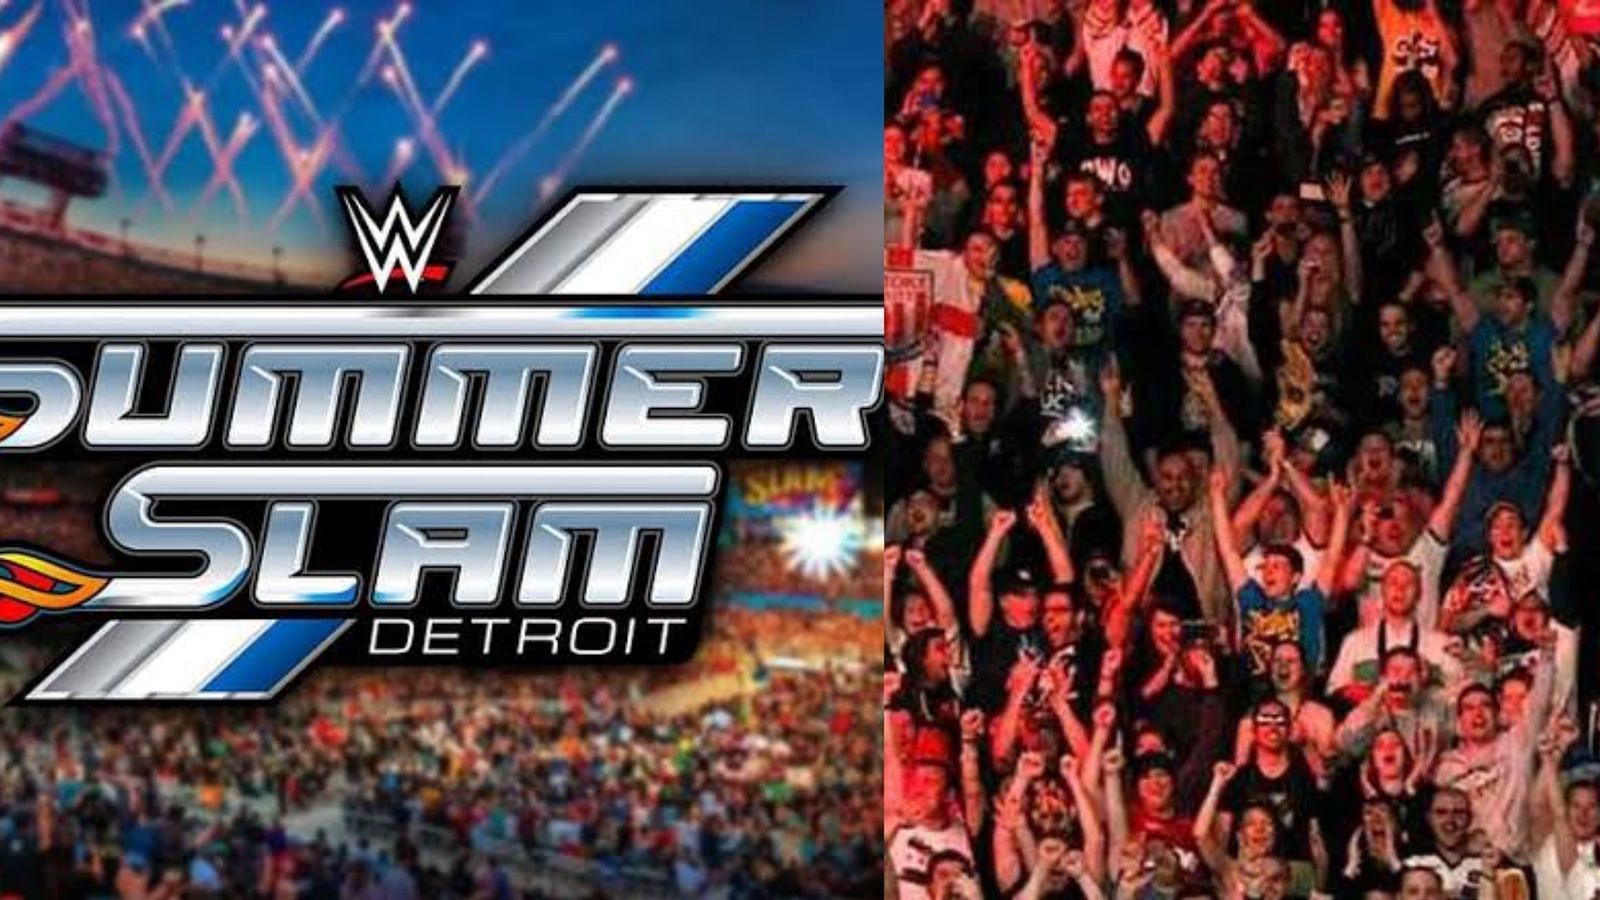 WWE SummerSlam will be live from Detroit this weekend!